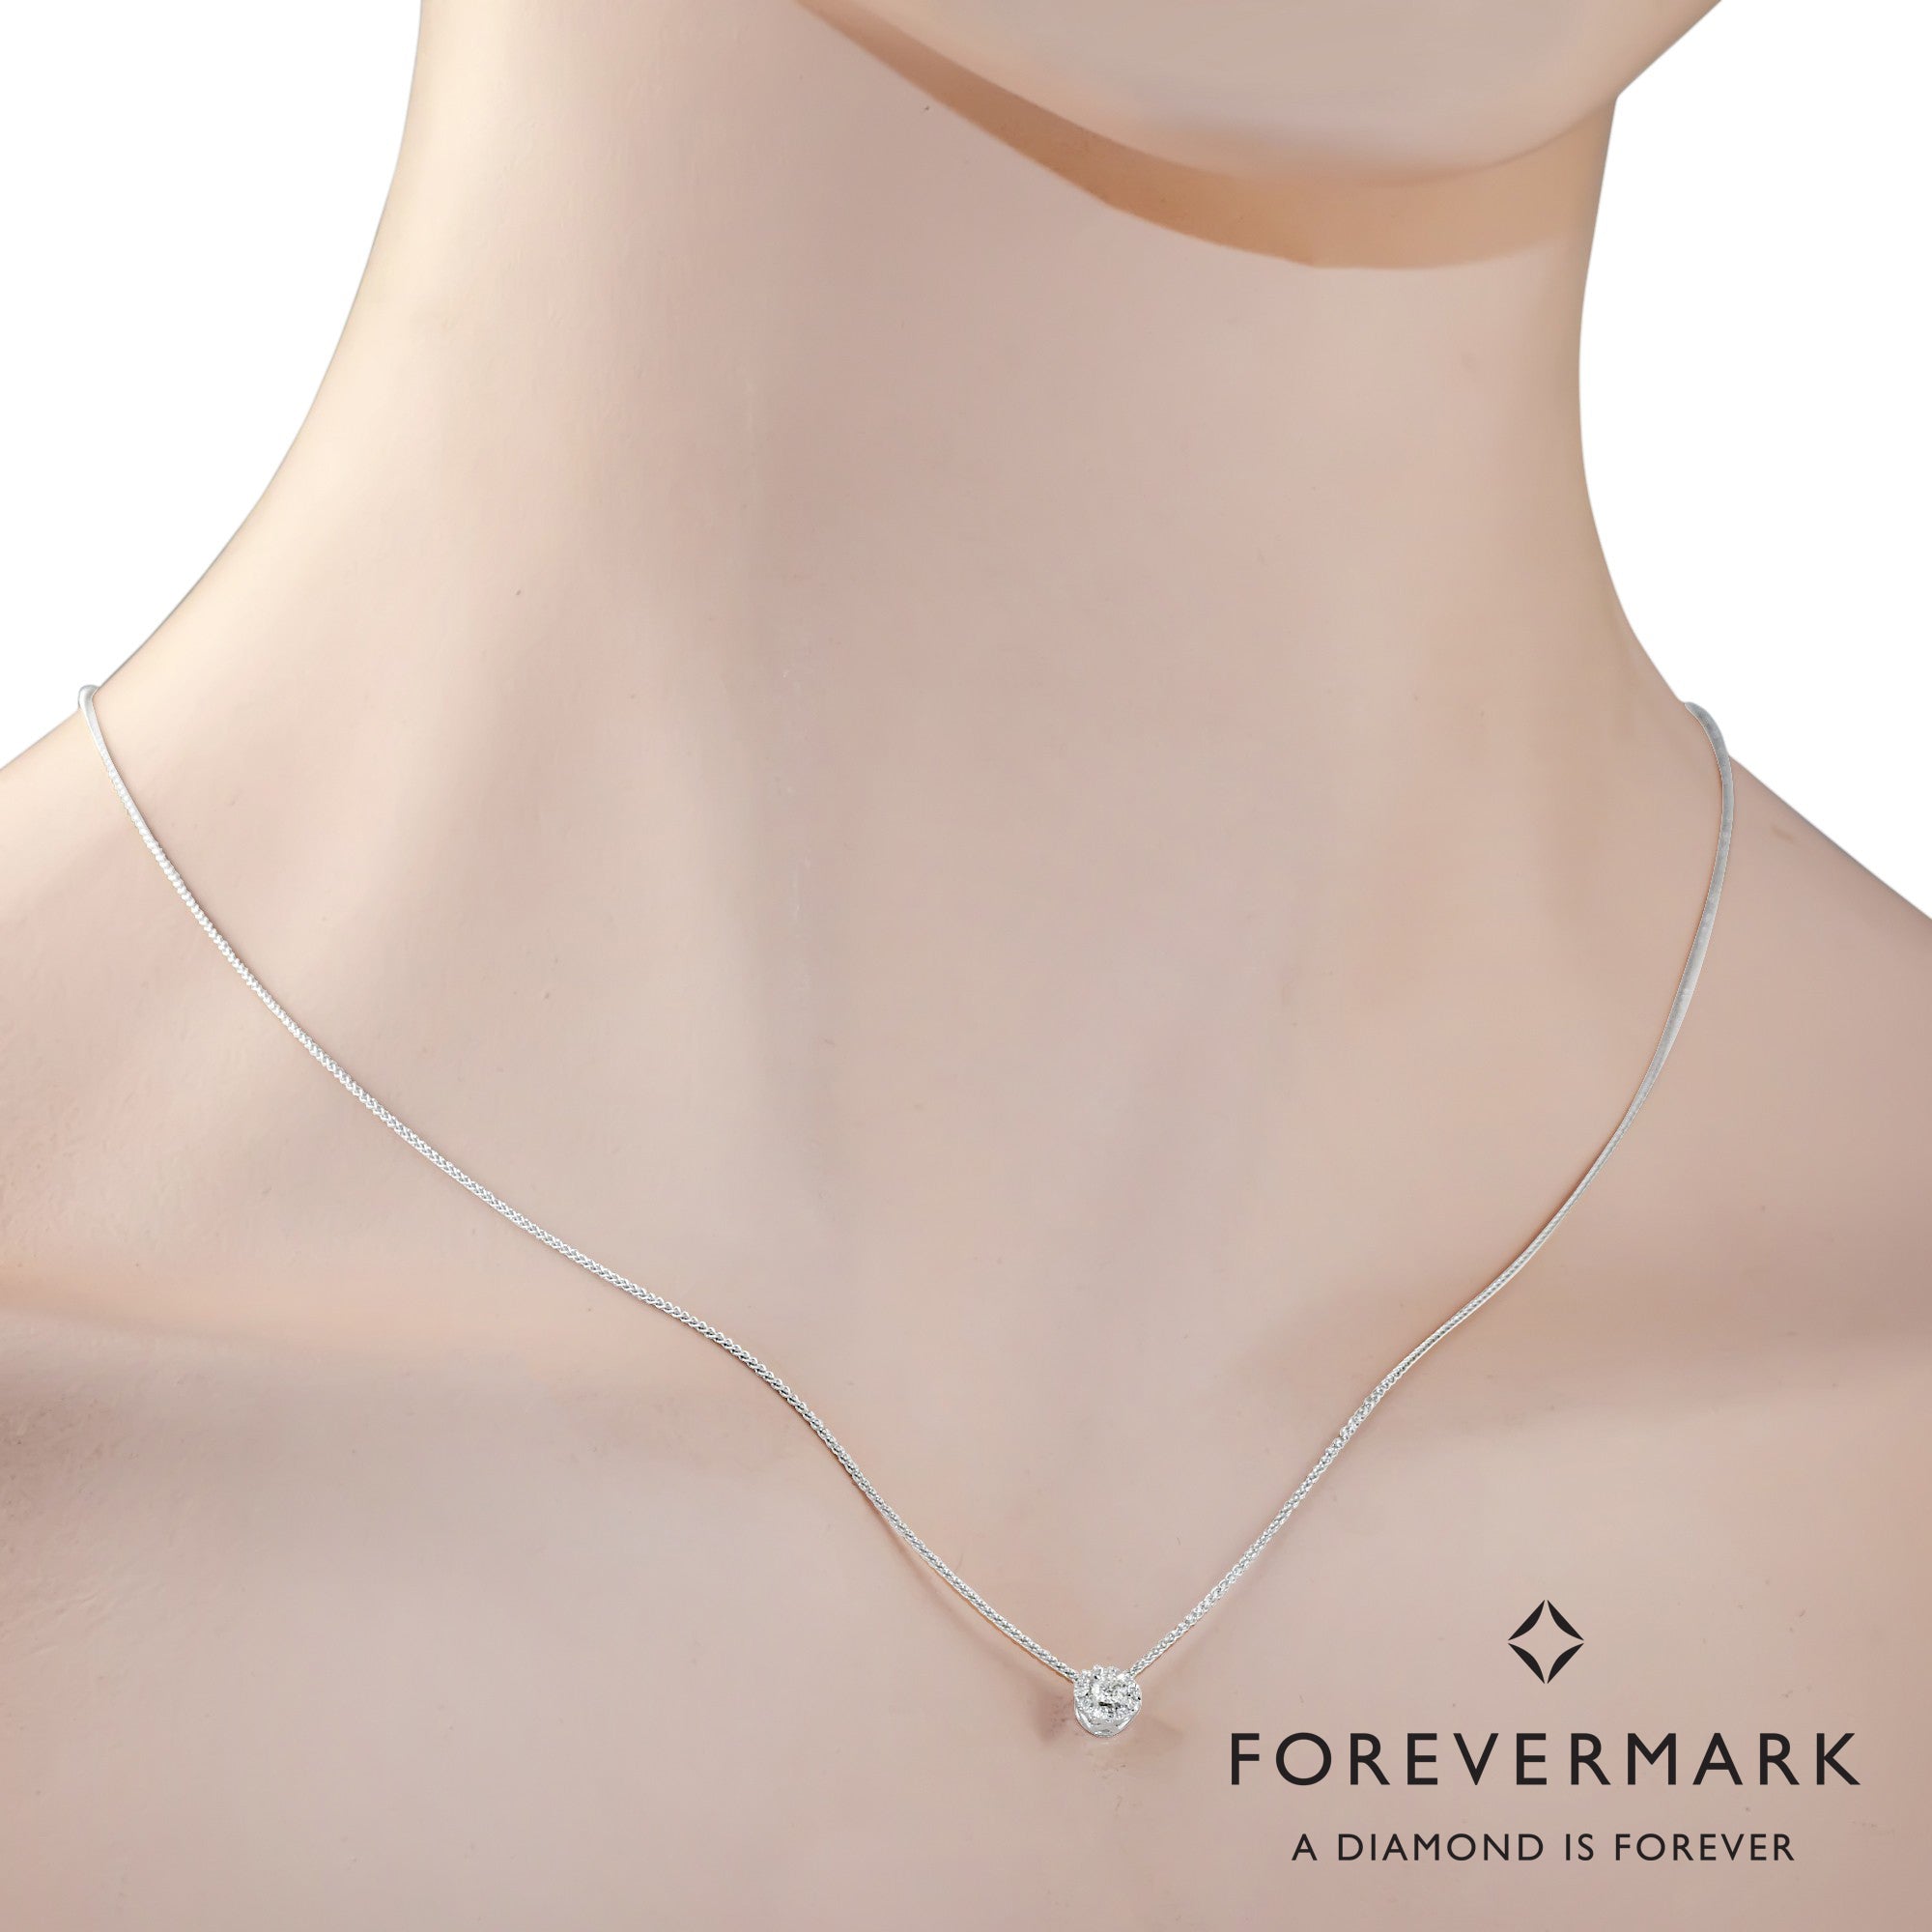 De Beers Forevermark Center of My Universe Diamond Halo Necklace in 18kt White Gold 1/7ct tw)